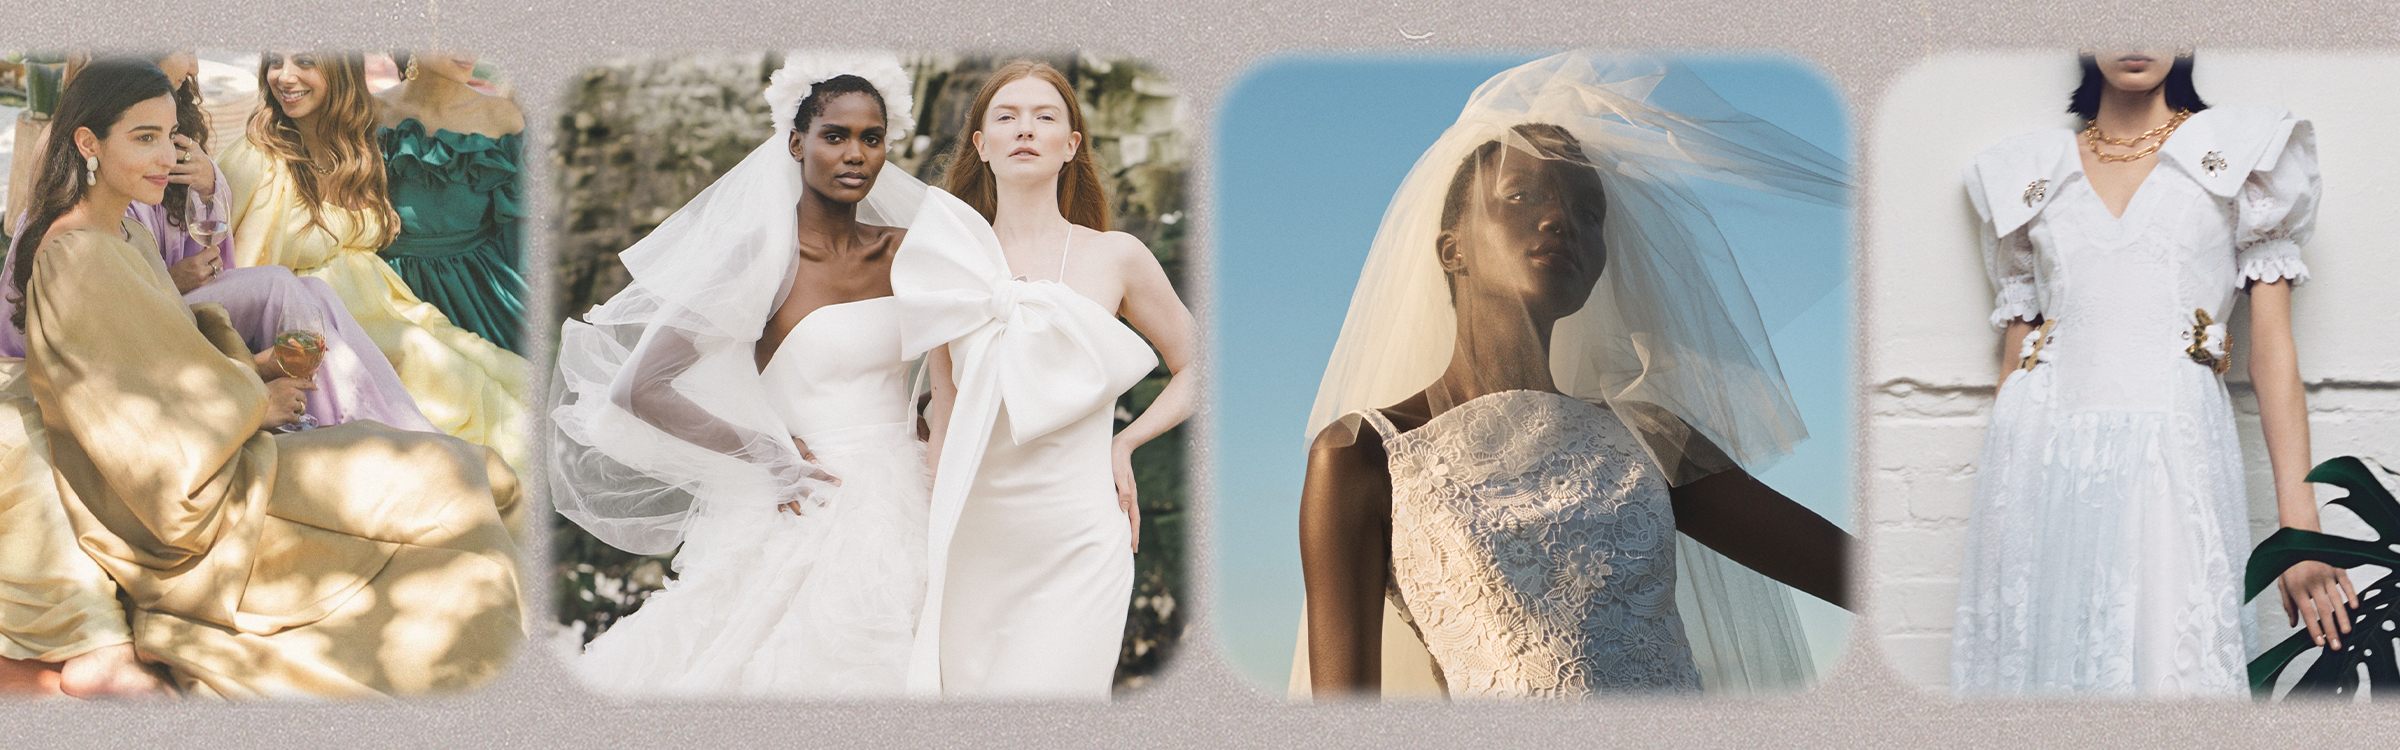 From Ruffles to Rental, These Are the Bridal Trends That Matter in 2021